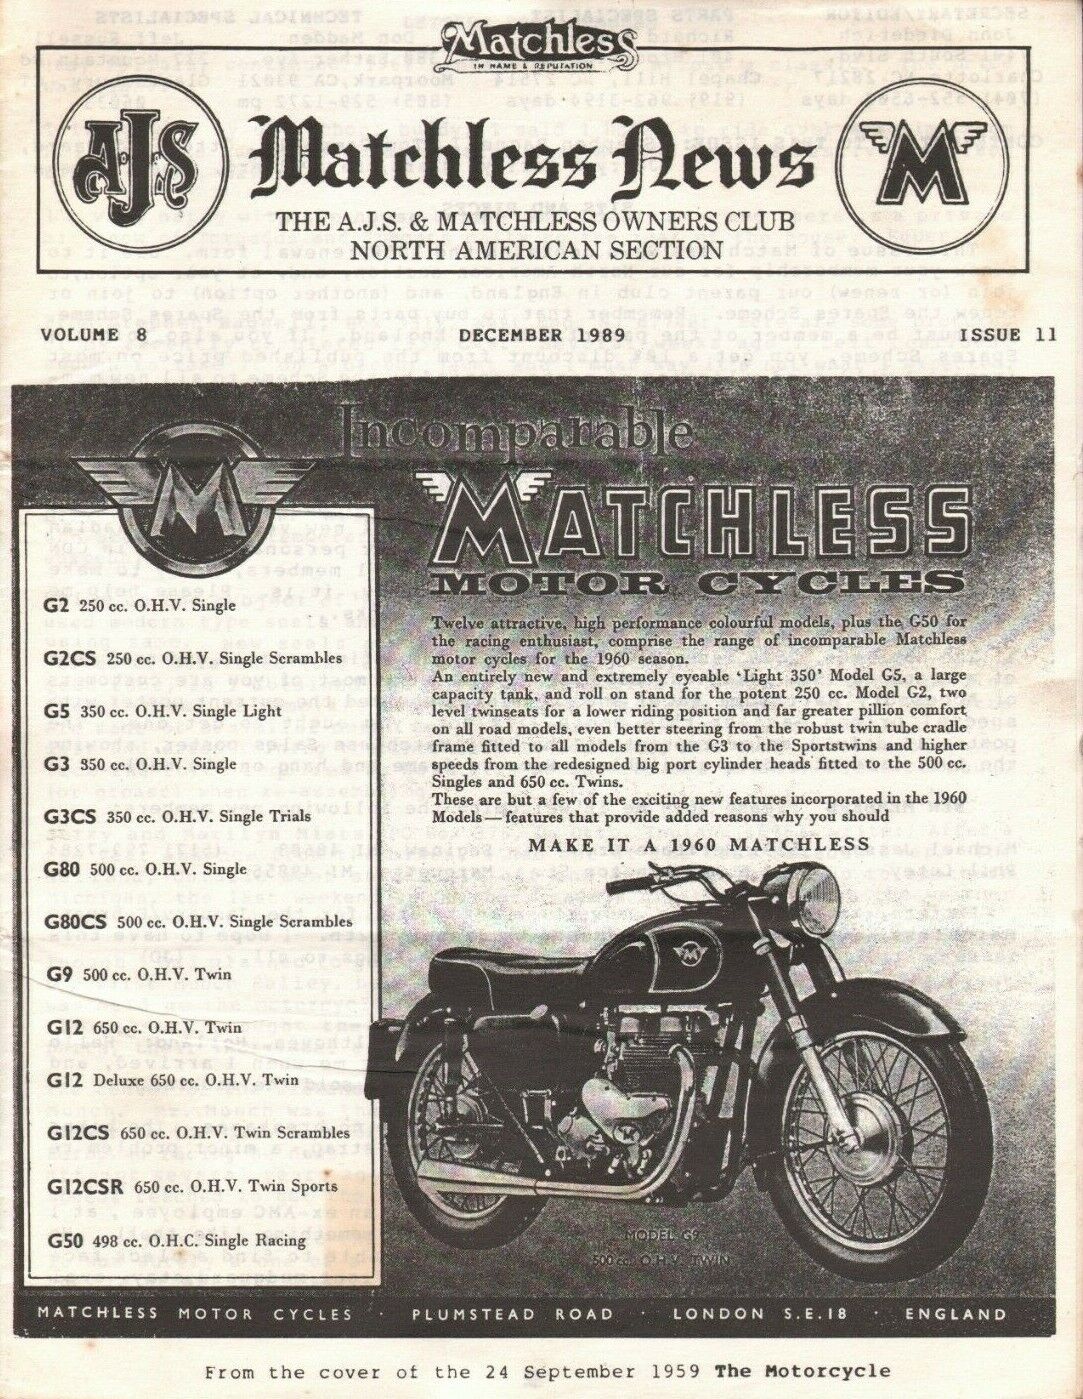 1989 December - A.J.S. & Matchless News - Motorcycle Owner\'s Club